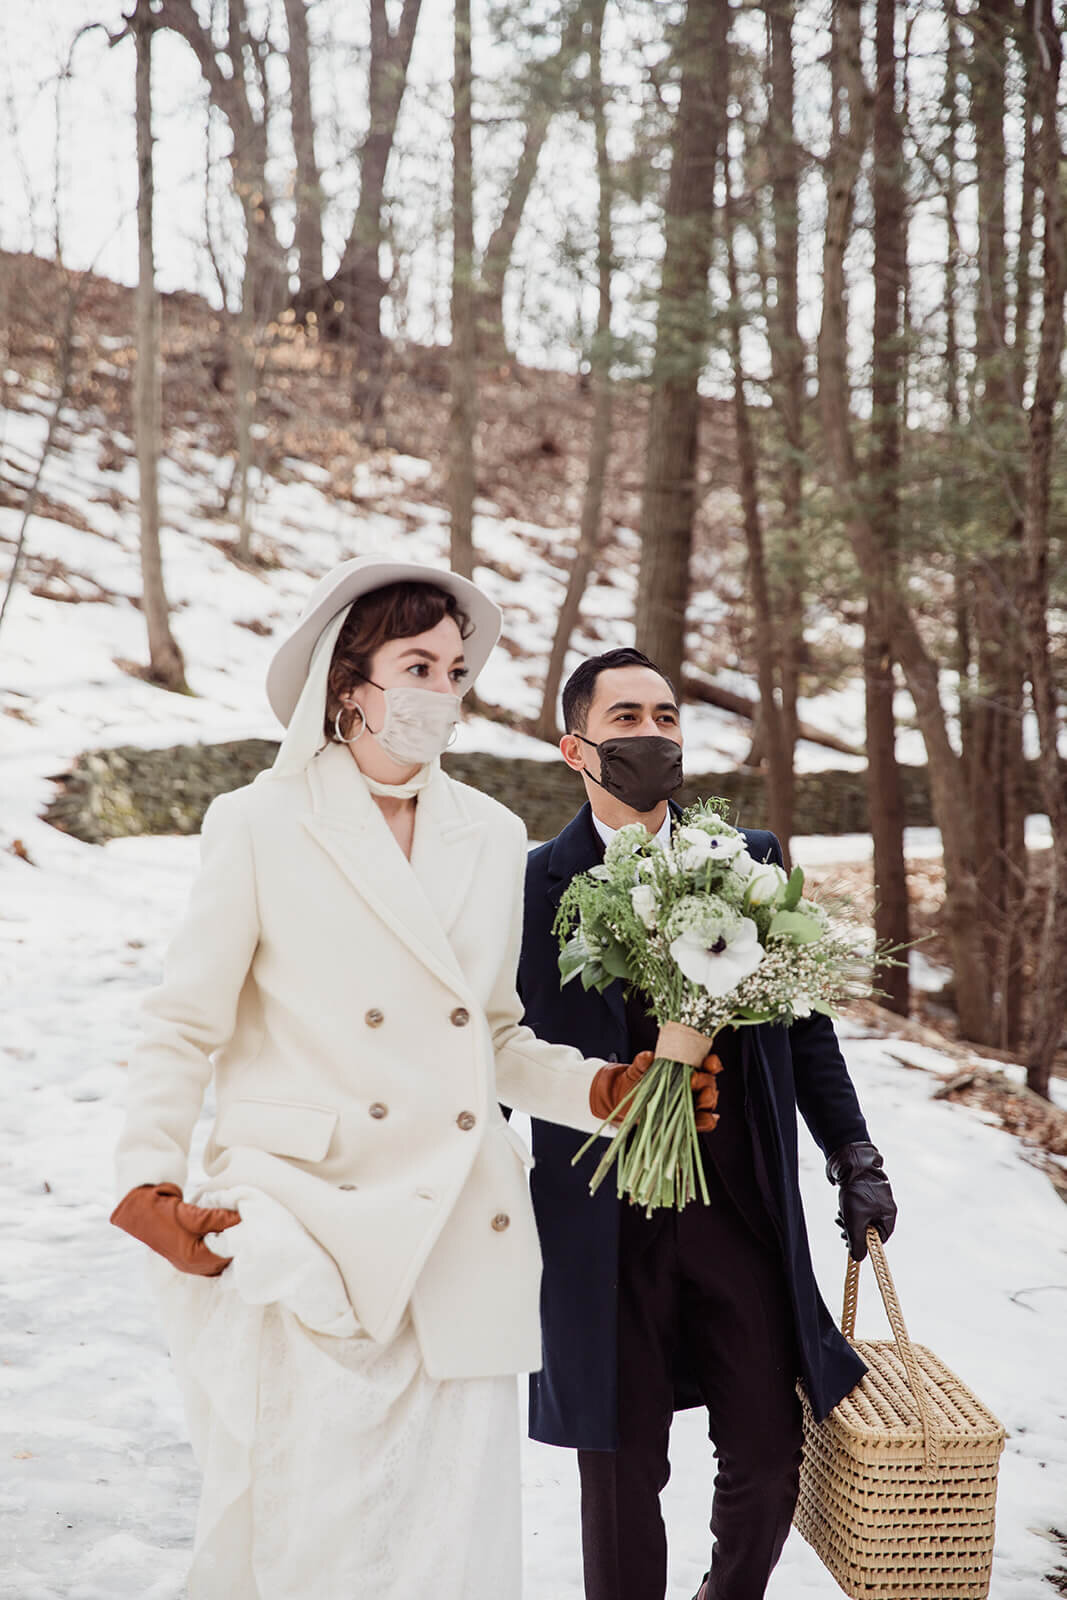  Stylish NYC couple elope late winter in the Finger Lakes region of Upstate NY. Couple hikes to ceremony spot in the snow 